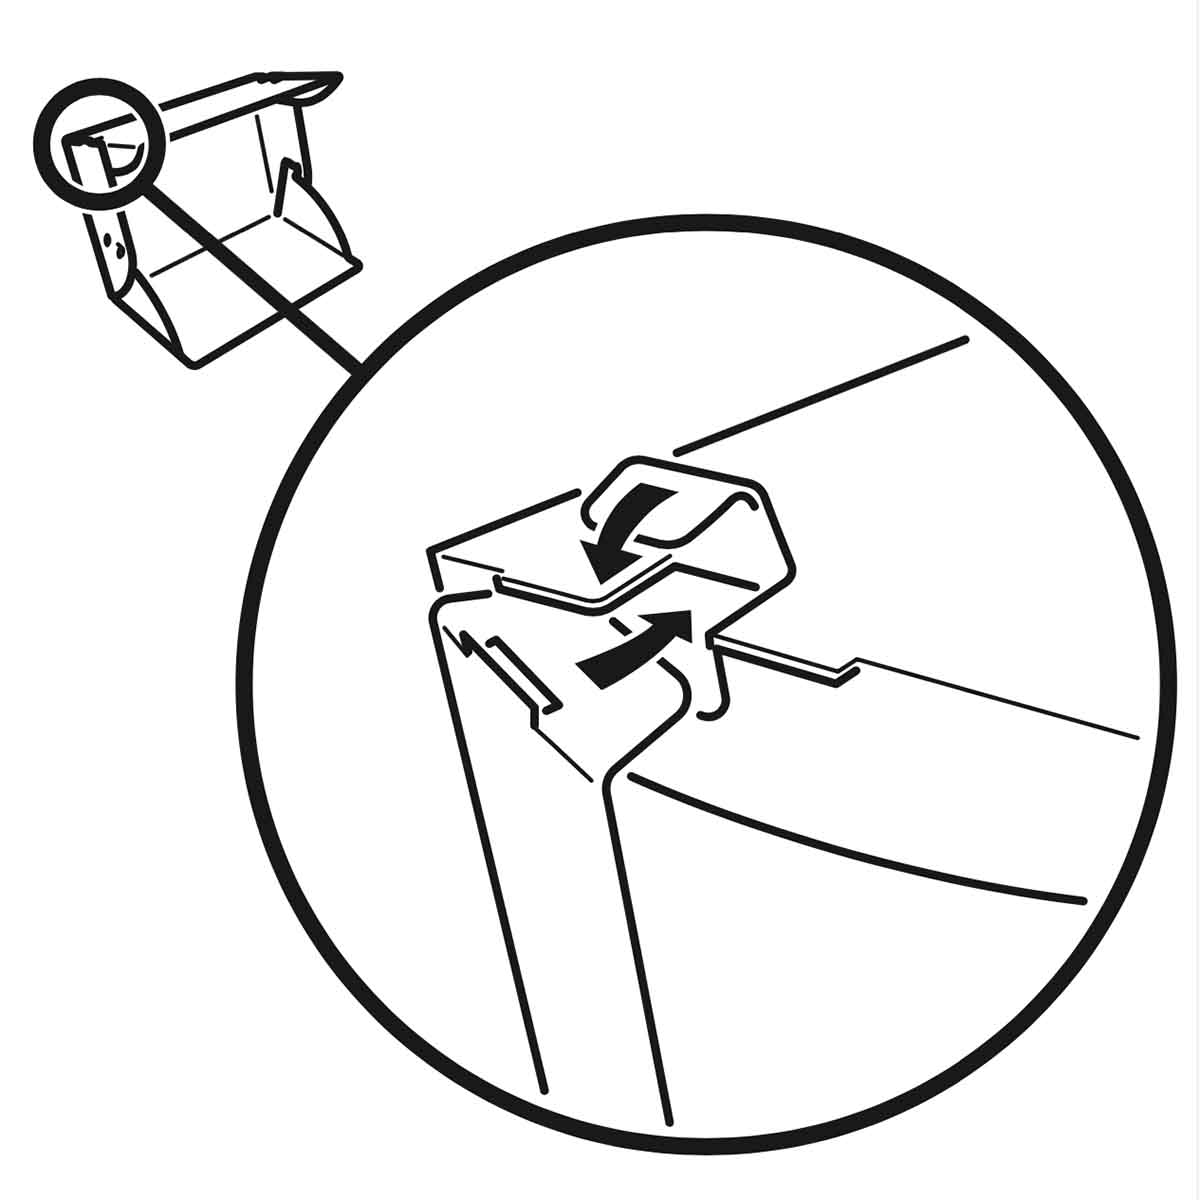 instruction illustrations illustration showing instructions for a laptop accessory